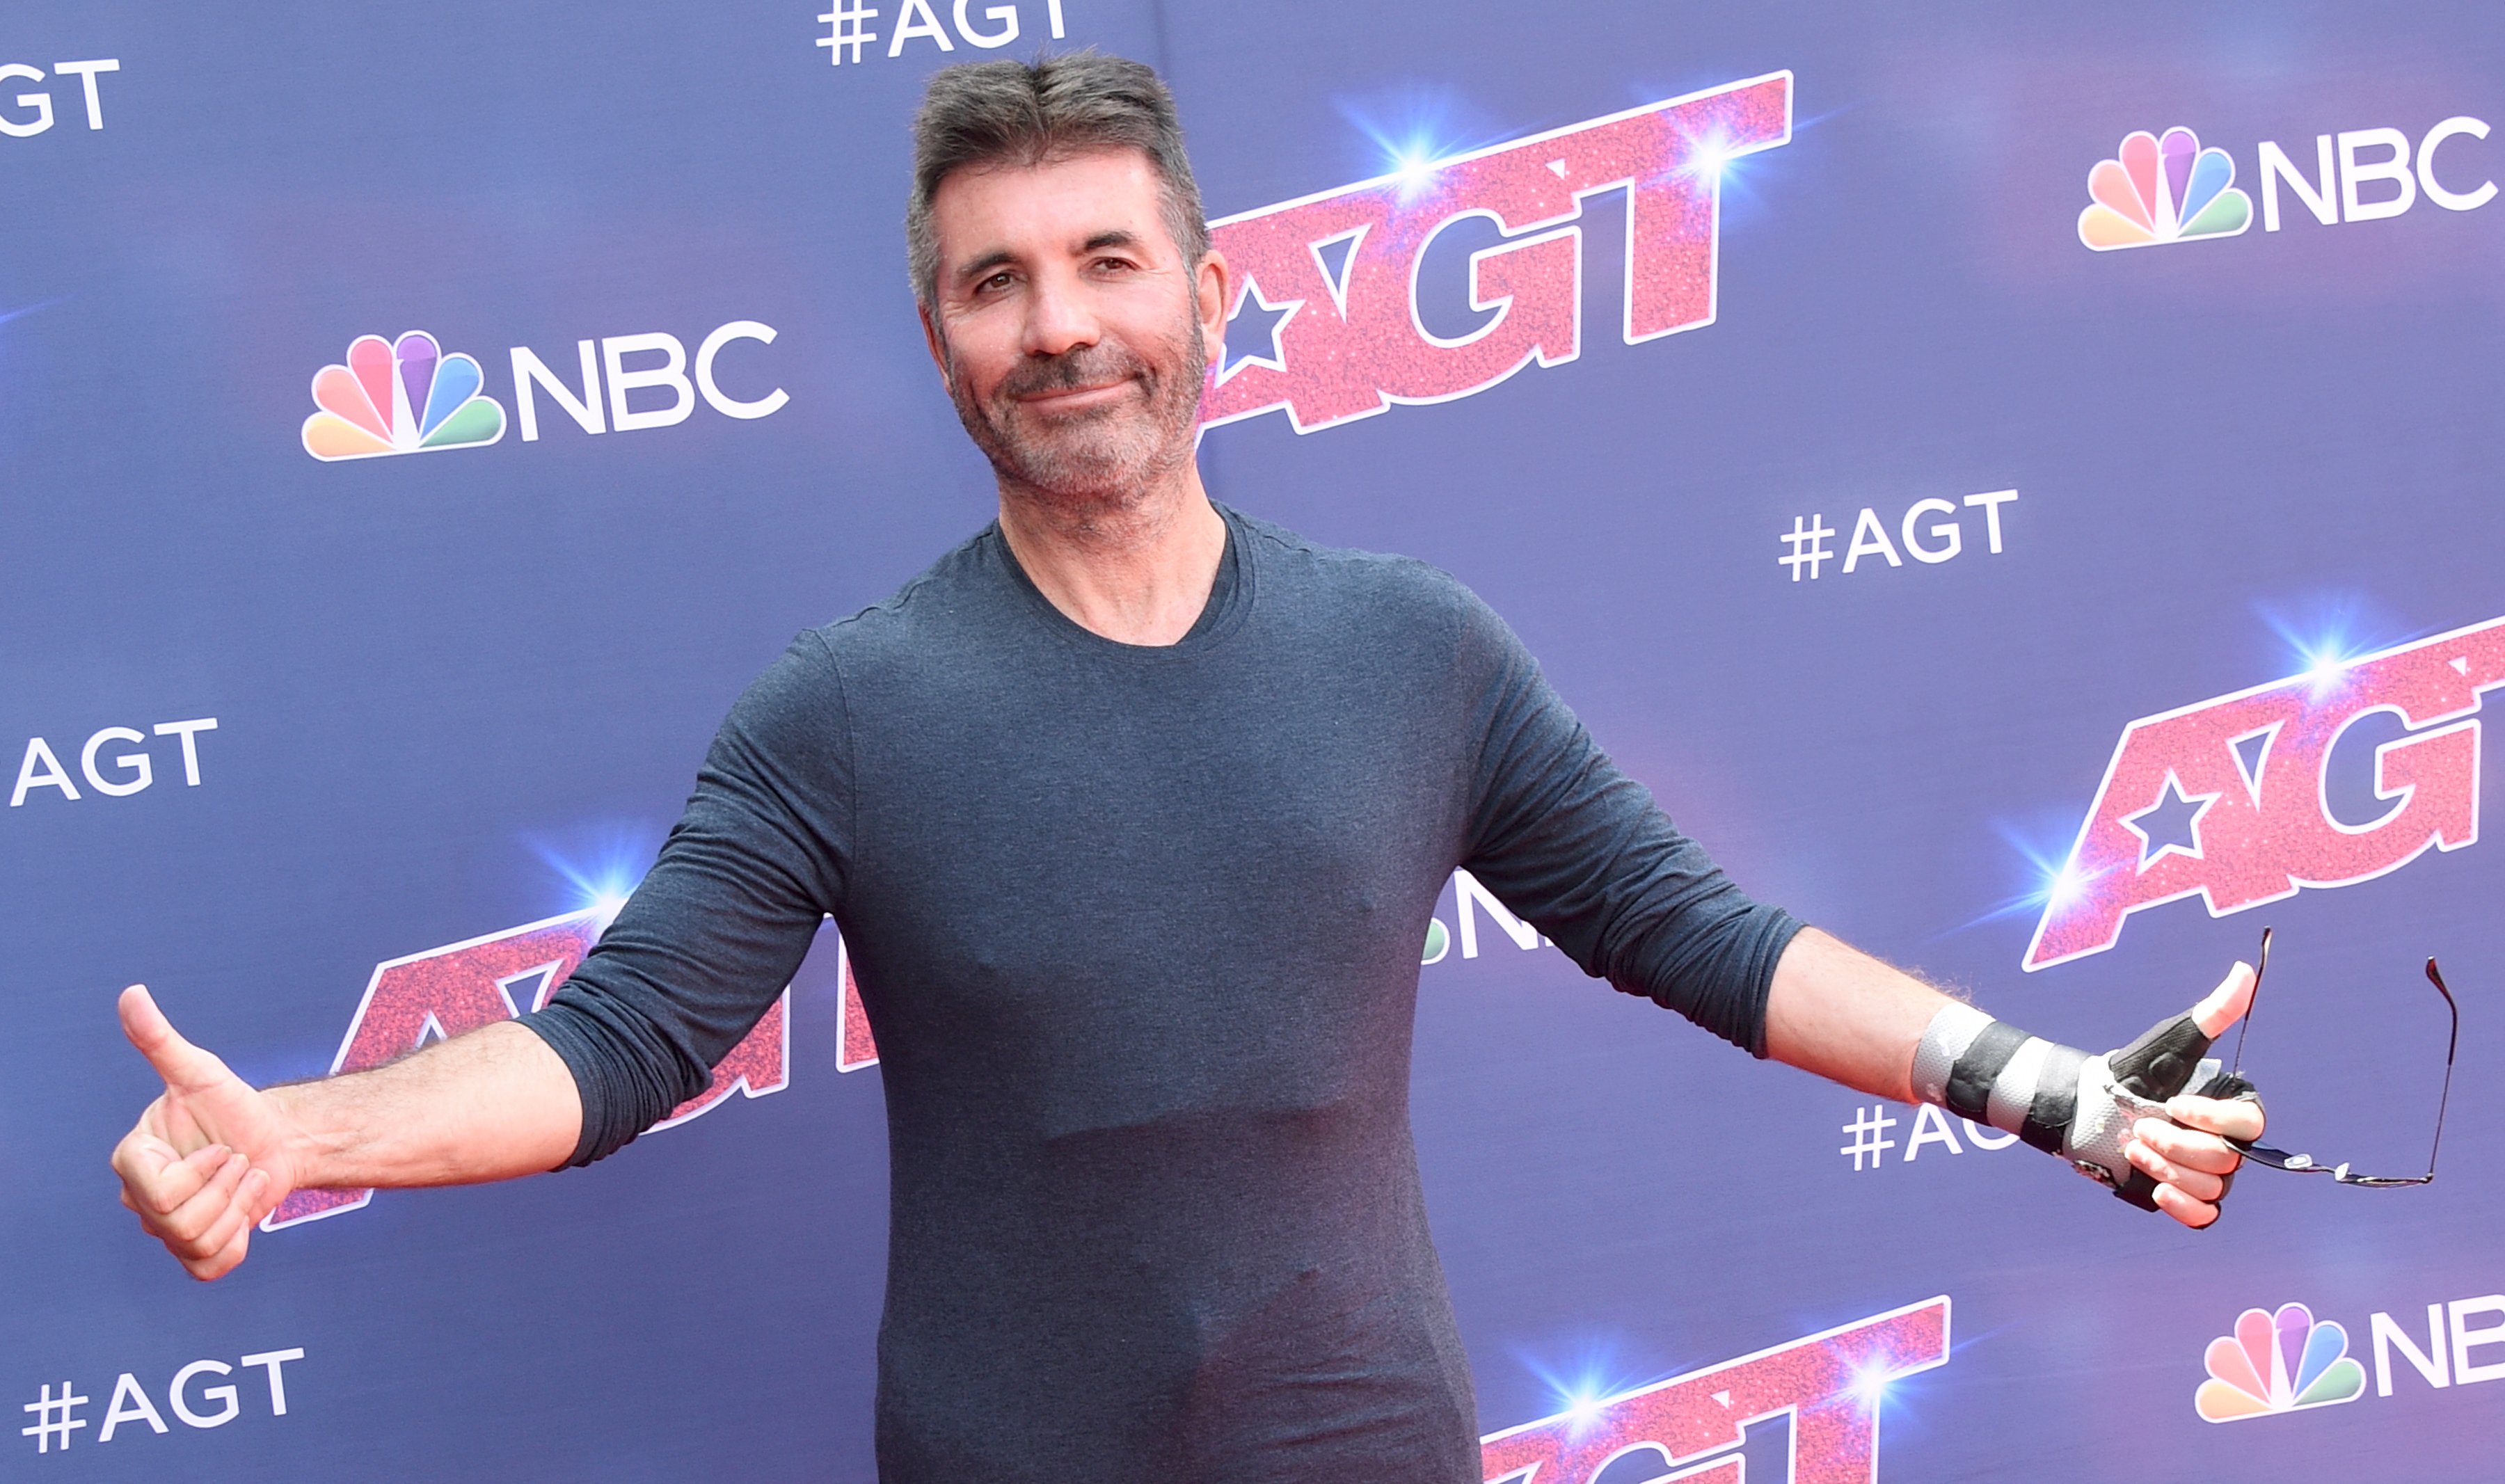 Simon Cowell at the "America's Got Talent" Season 17 Kick-Off on April 20, 2022 | Source: Getty Images